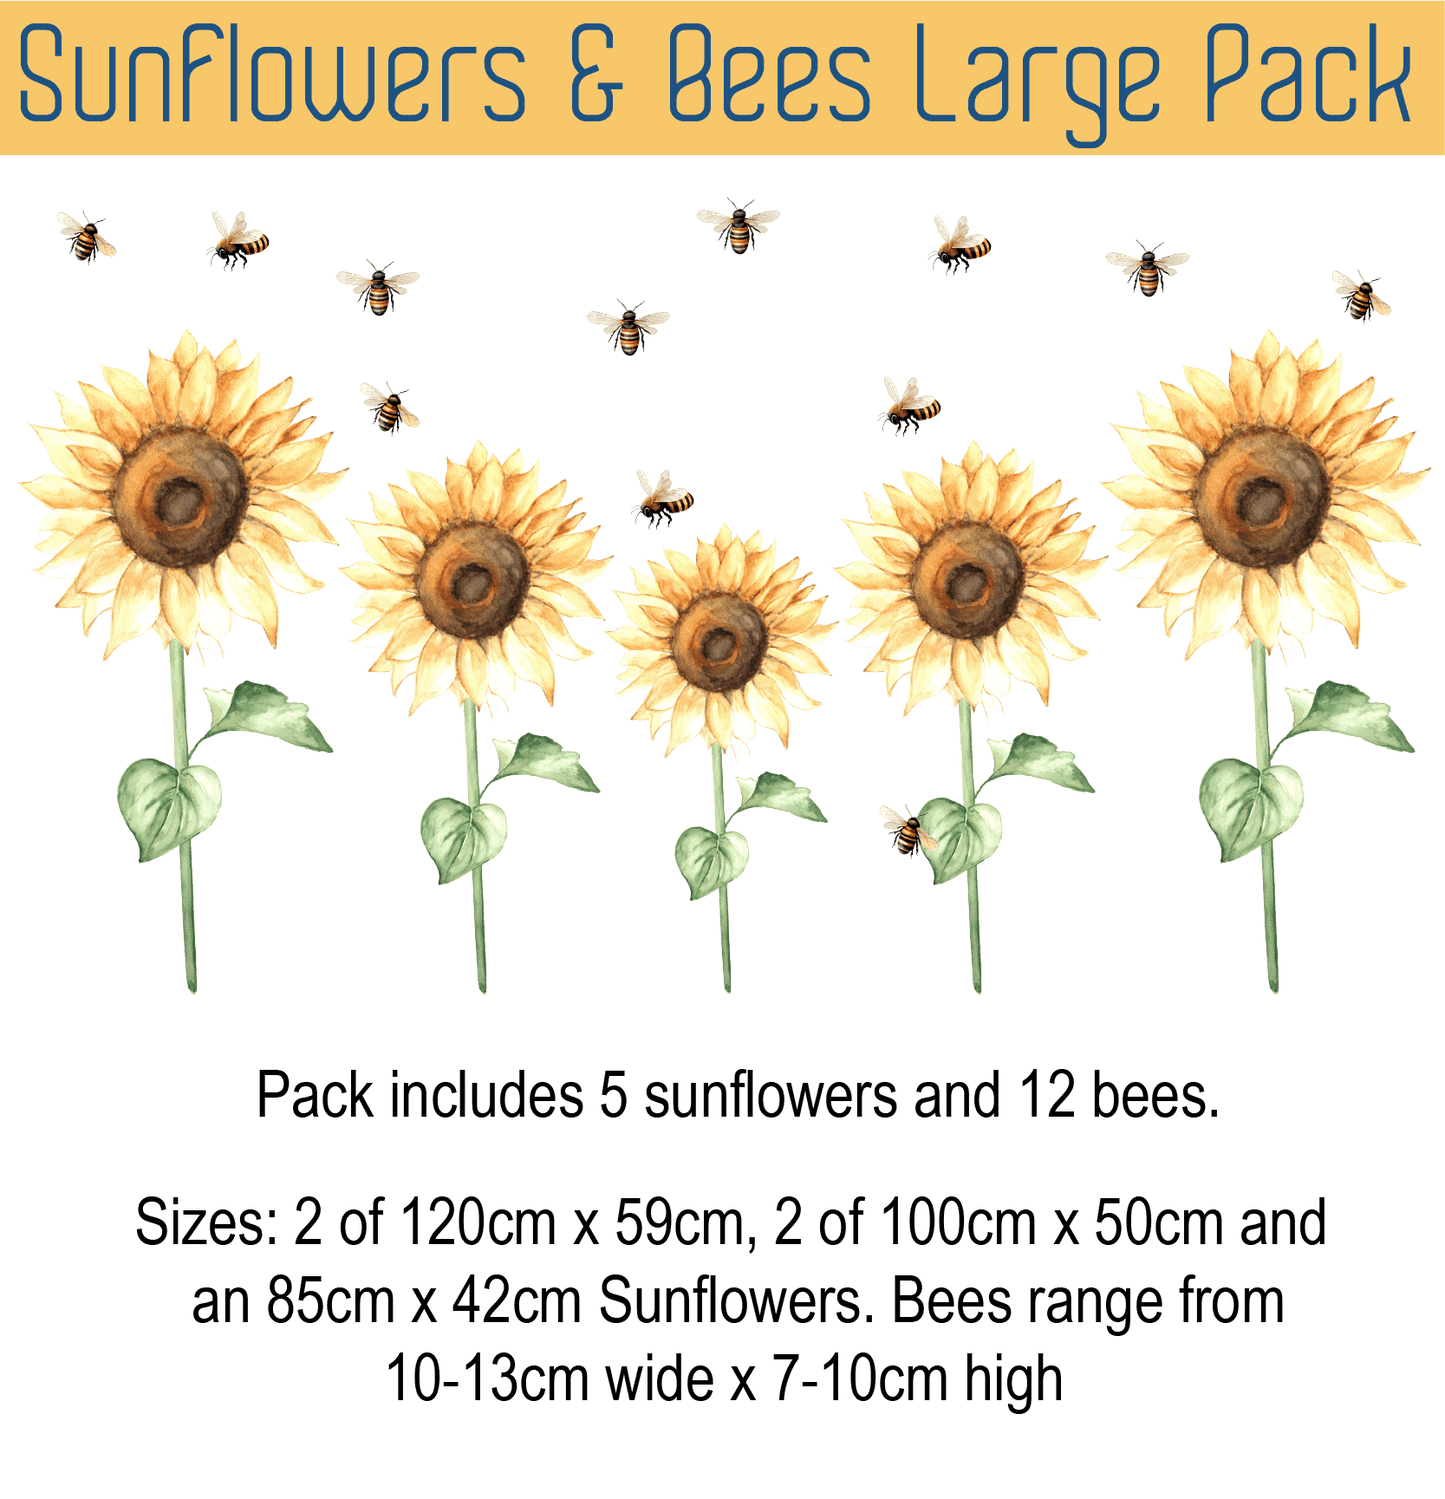 Sunflower Large Wall Sticker Decals and bees large pack with damage free and removable fabric.